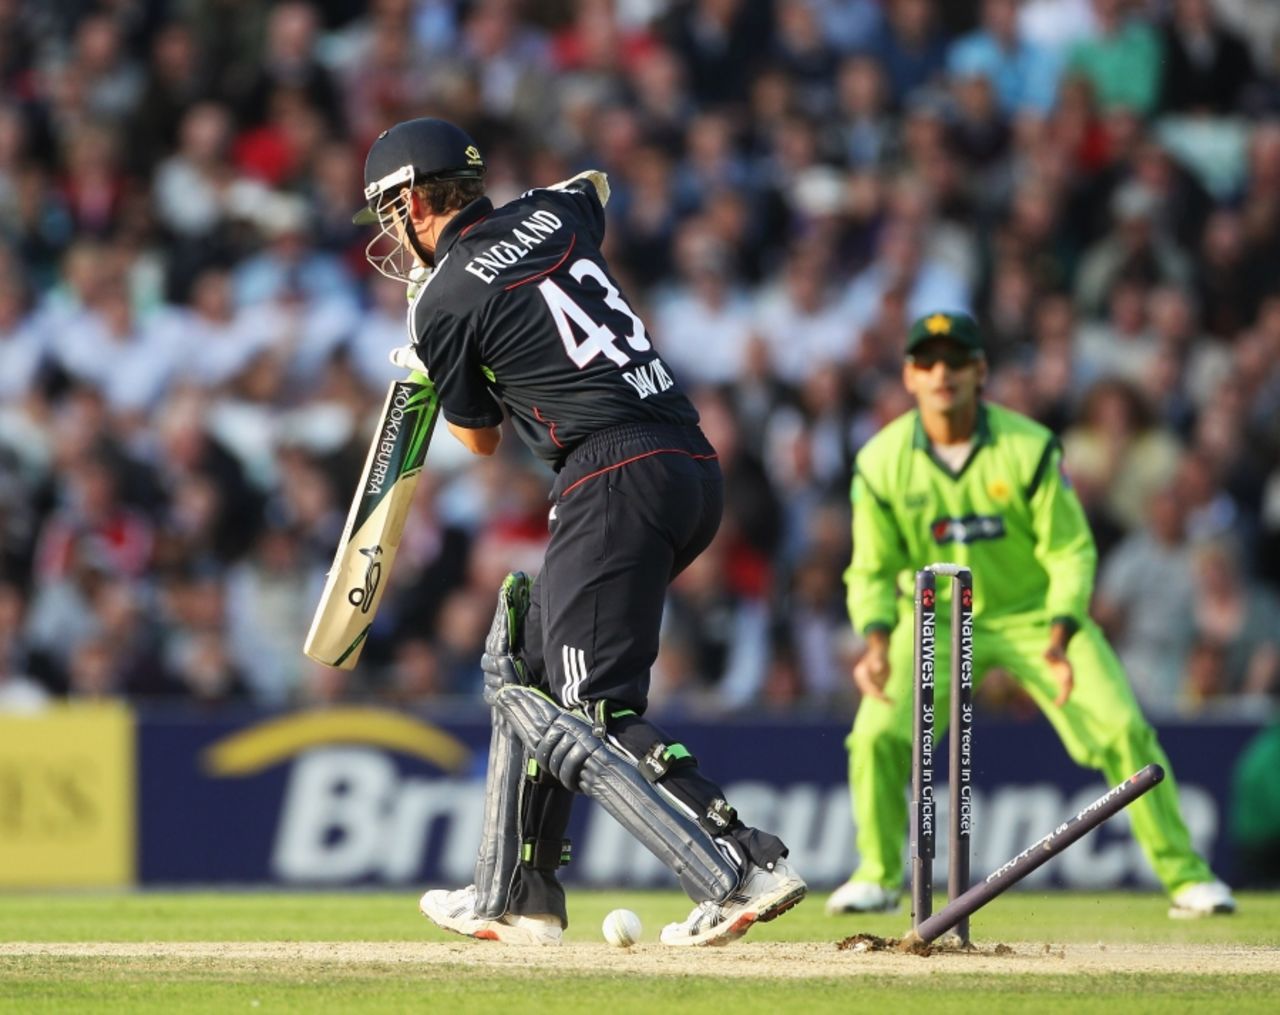 Steve Davies left a gap between bat and pad to be bowled by Abdul Razzaq, England v Pakistan, 3rd ODI, The Oval, September 17 2010